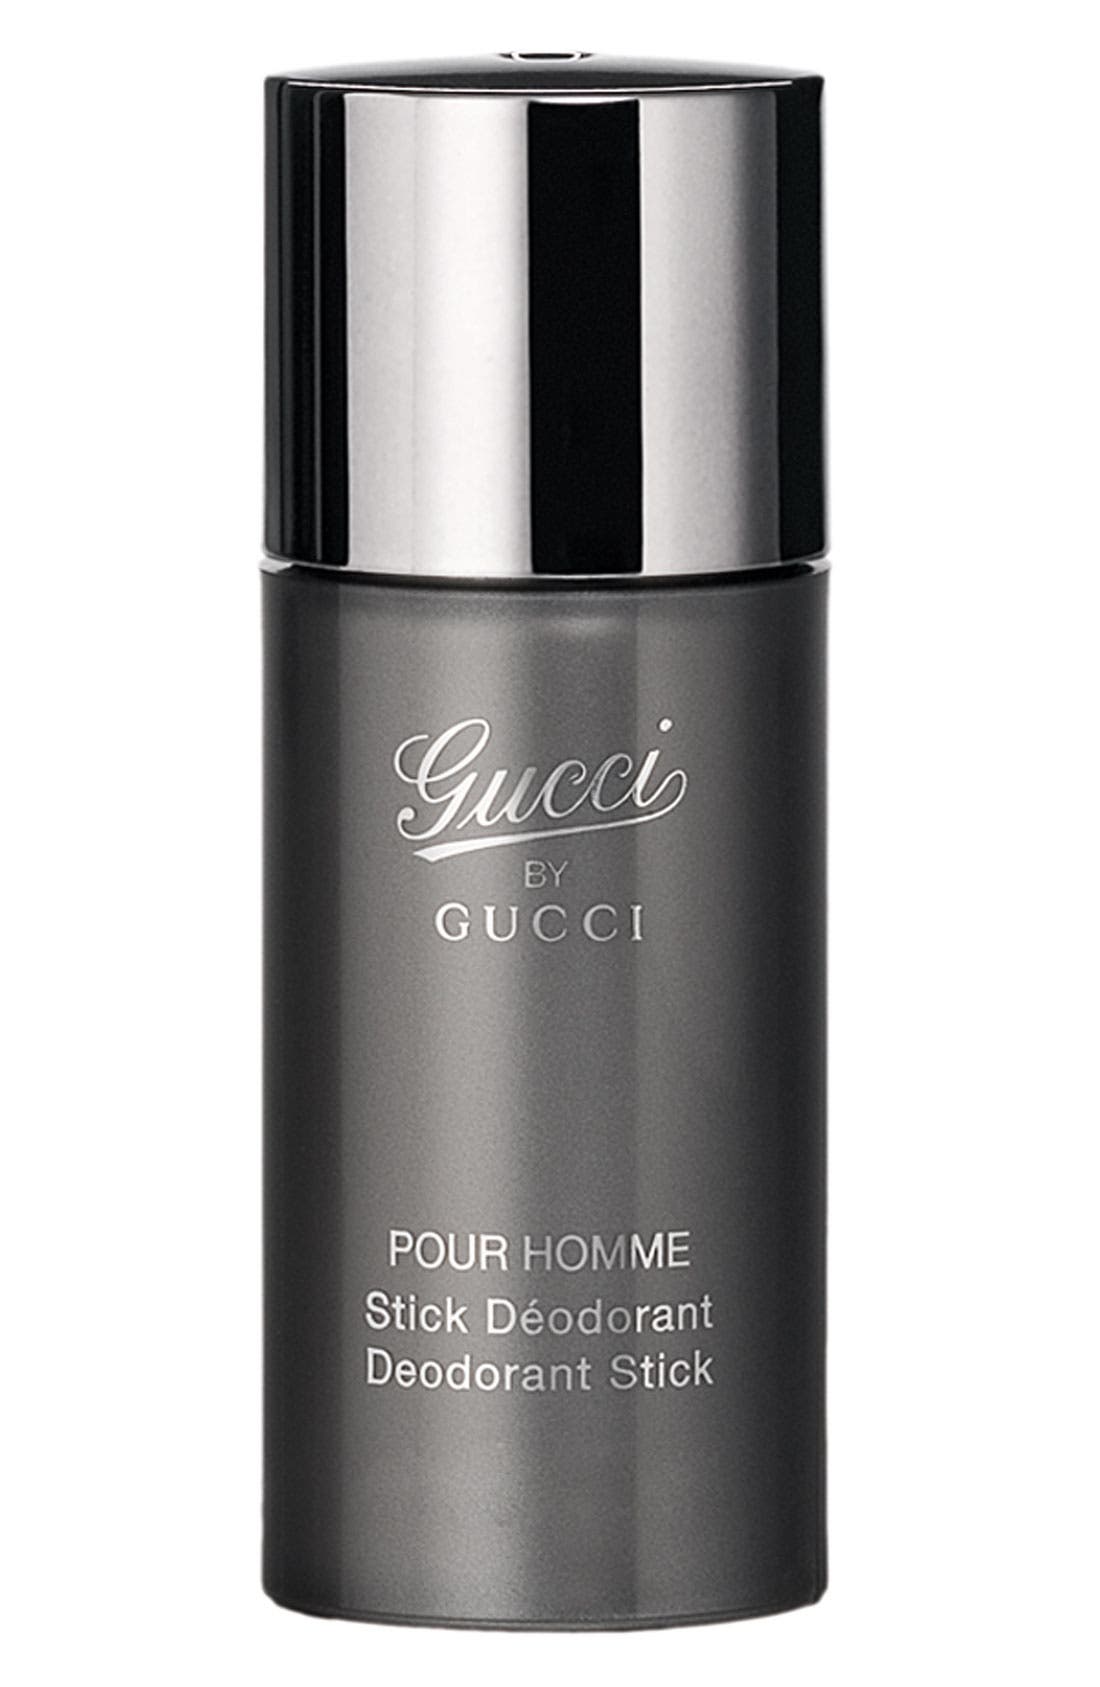 By Gucci 'Pour Homme' Deodorant Stick 